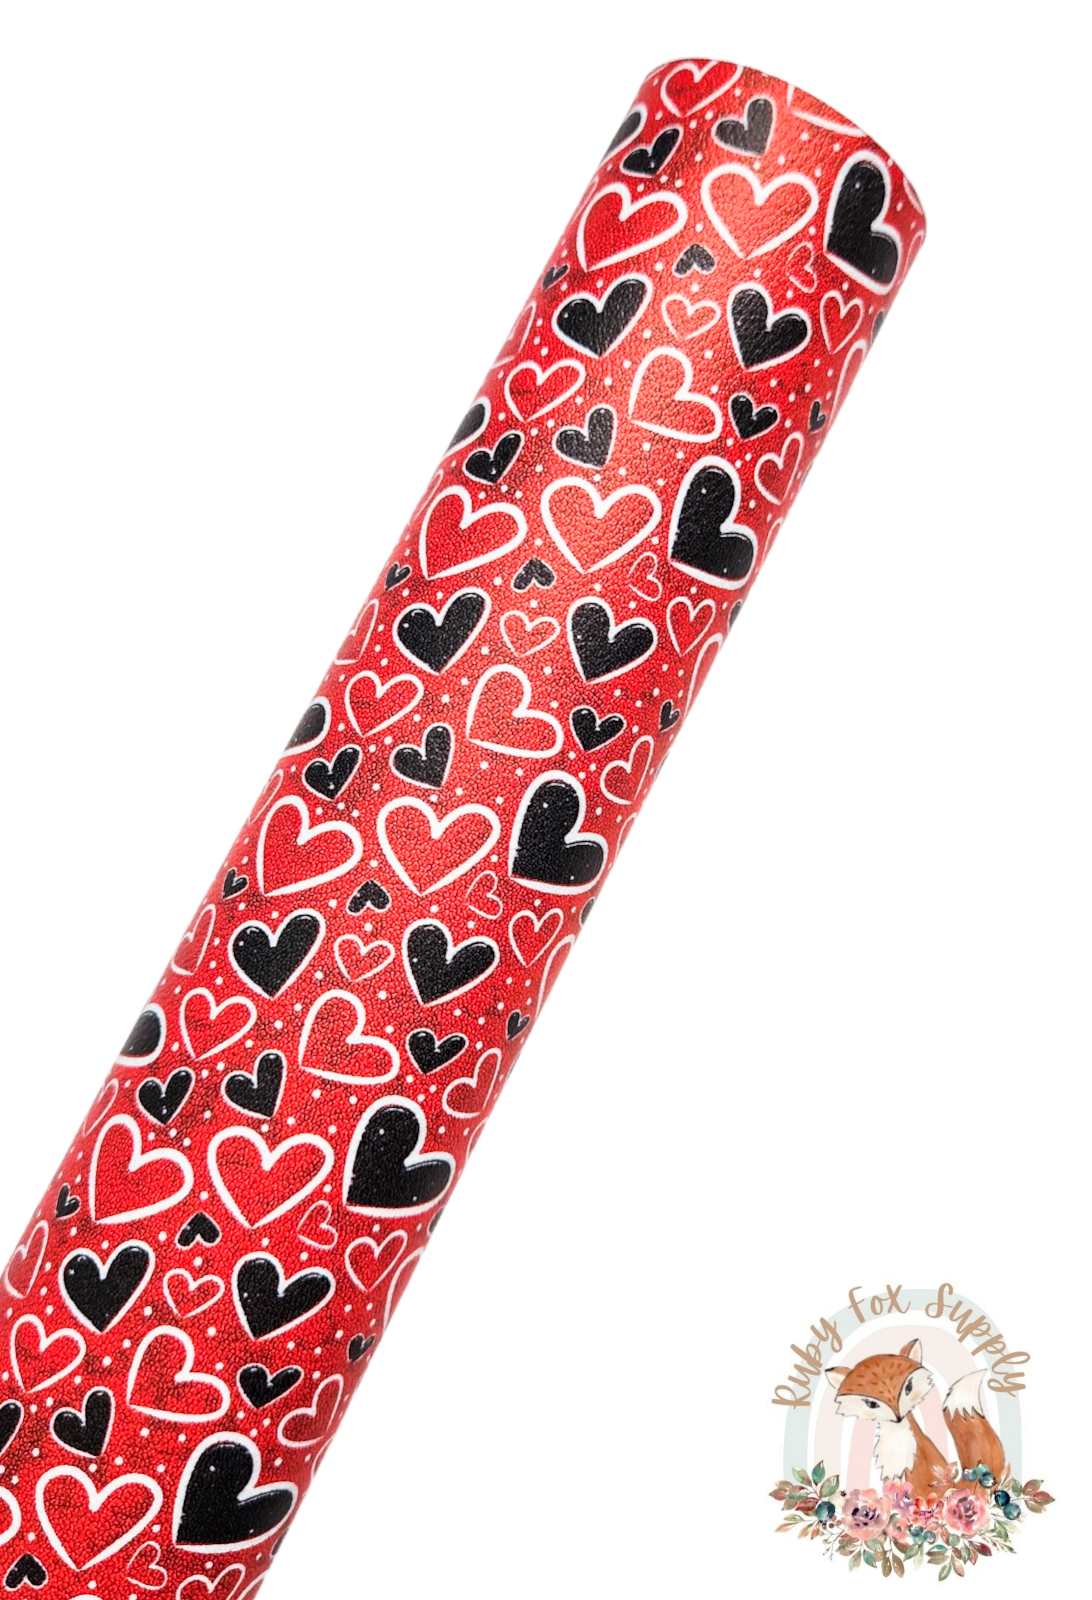 Red and Black Hearts 9x12 faux leather sheet